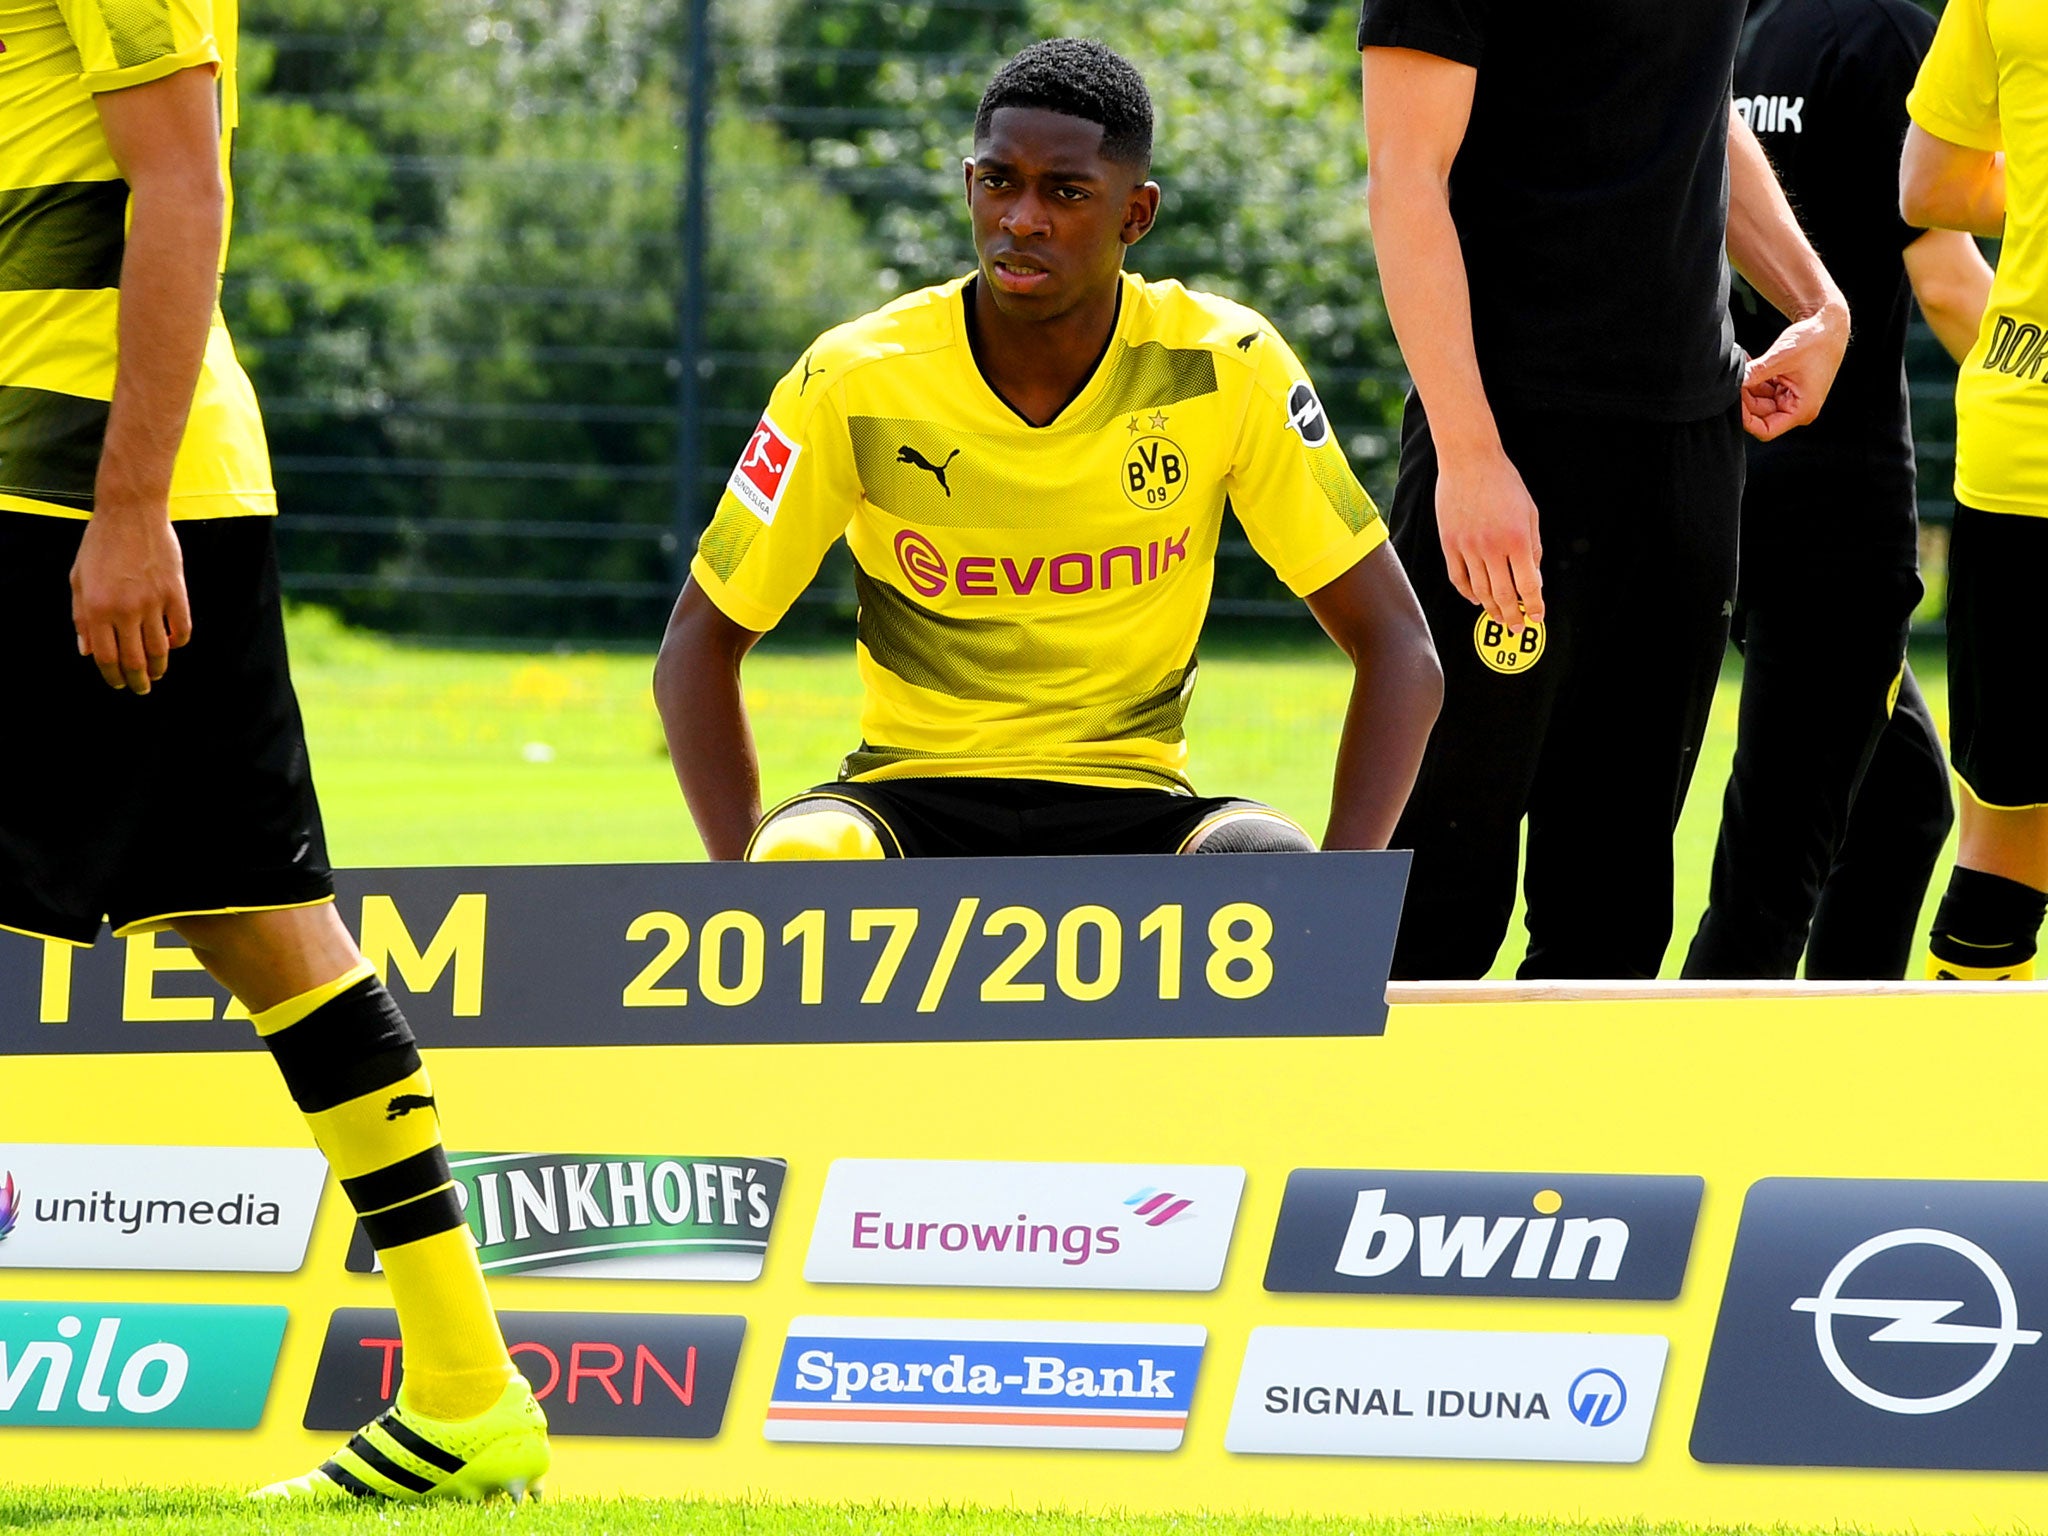 Ousmane Dembele has been suspended indefinitely by Borussia Dortmund